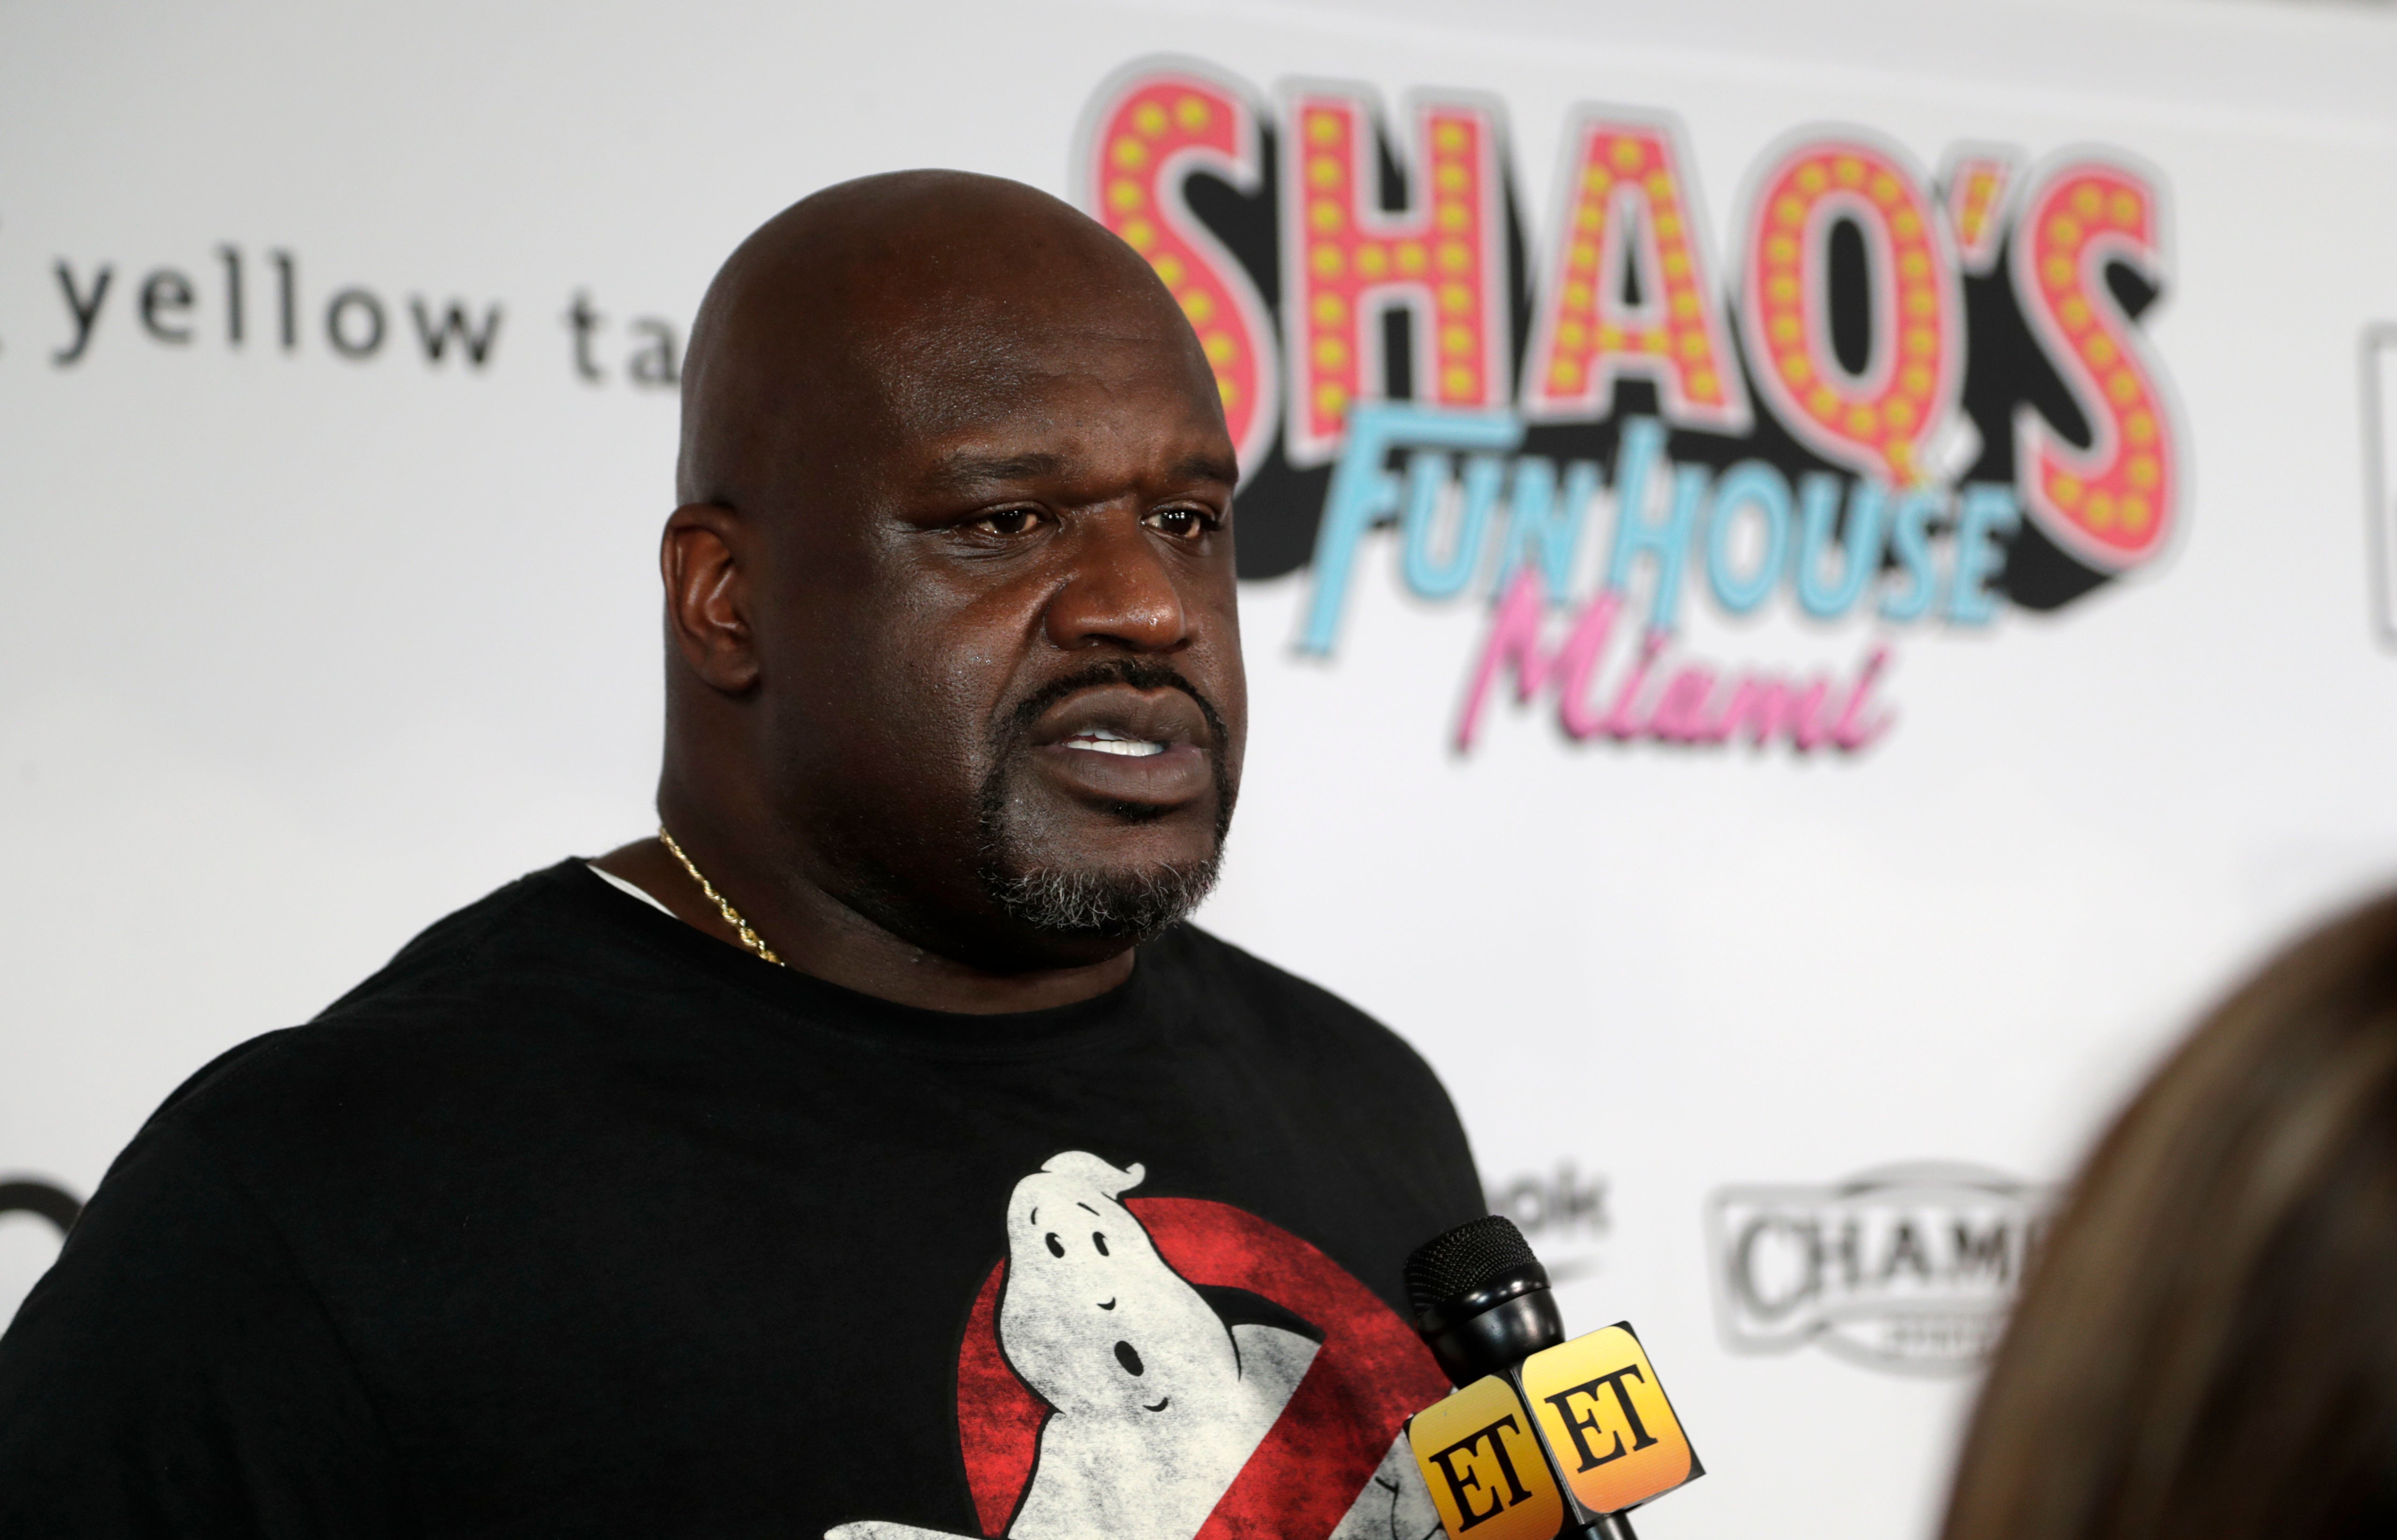 NBA champ offers tough critique of Shaq's son trying to break into